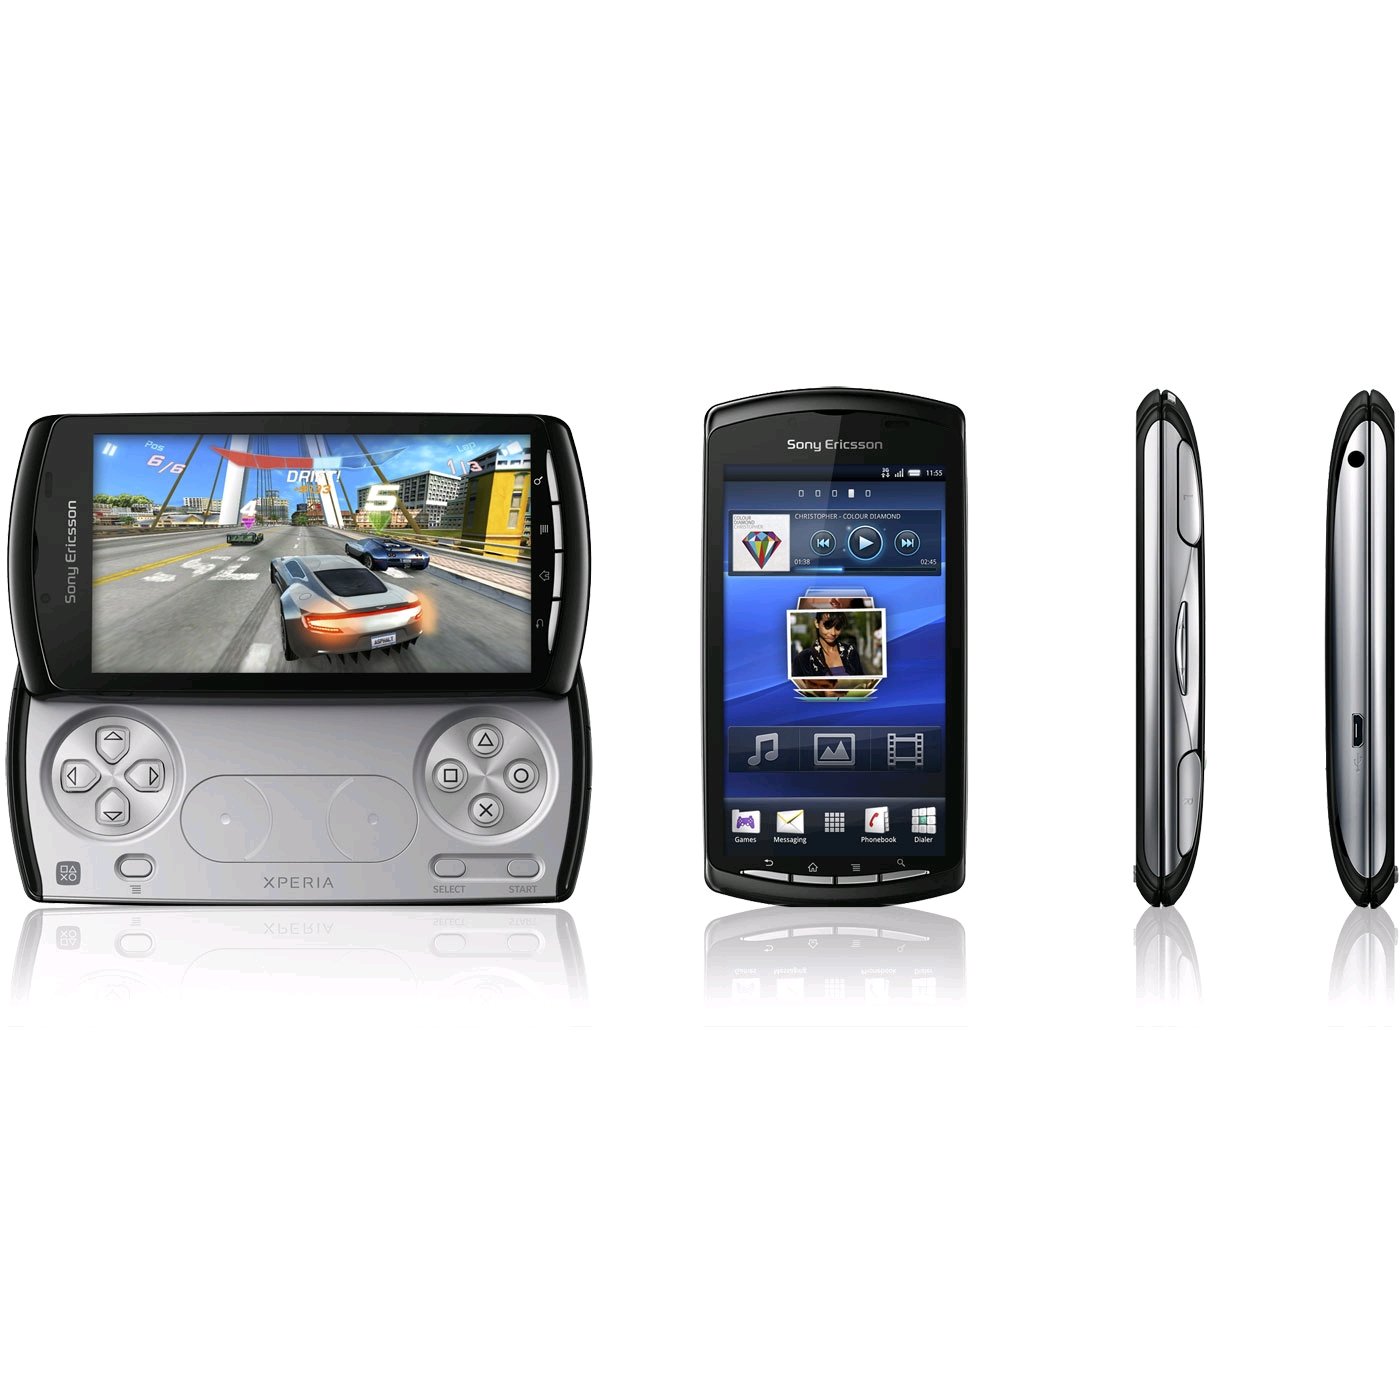 Sony Ericsson Xperia PLAY specs, review, release date PhonesData